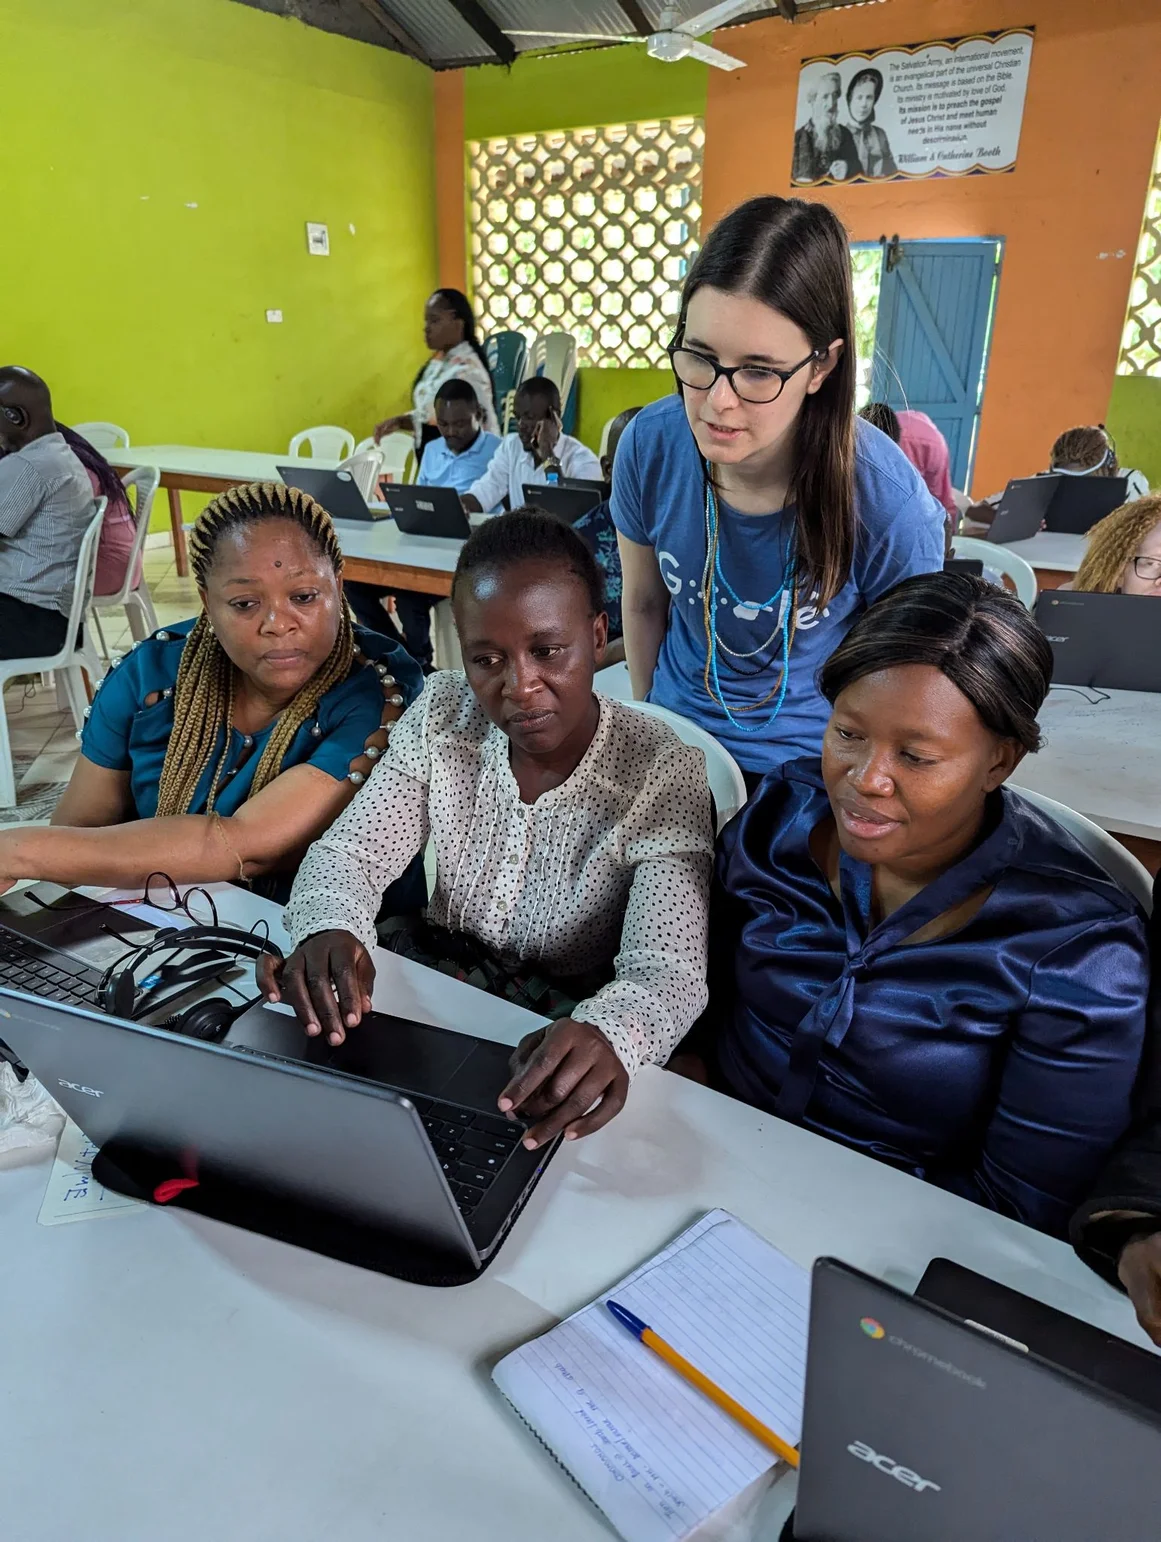 A fellow Googler stands over three teachers and helps teach Chromebook Accessibility at the Likoni School for the Visually Impaired, in Mombasa, Kenya.